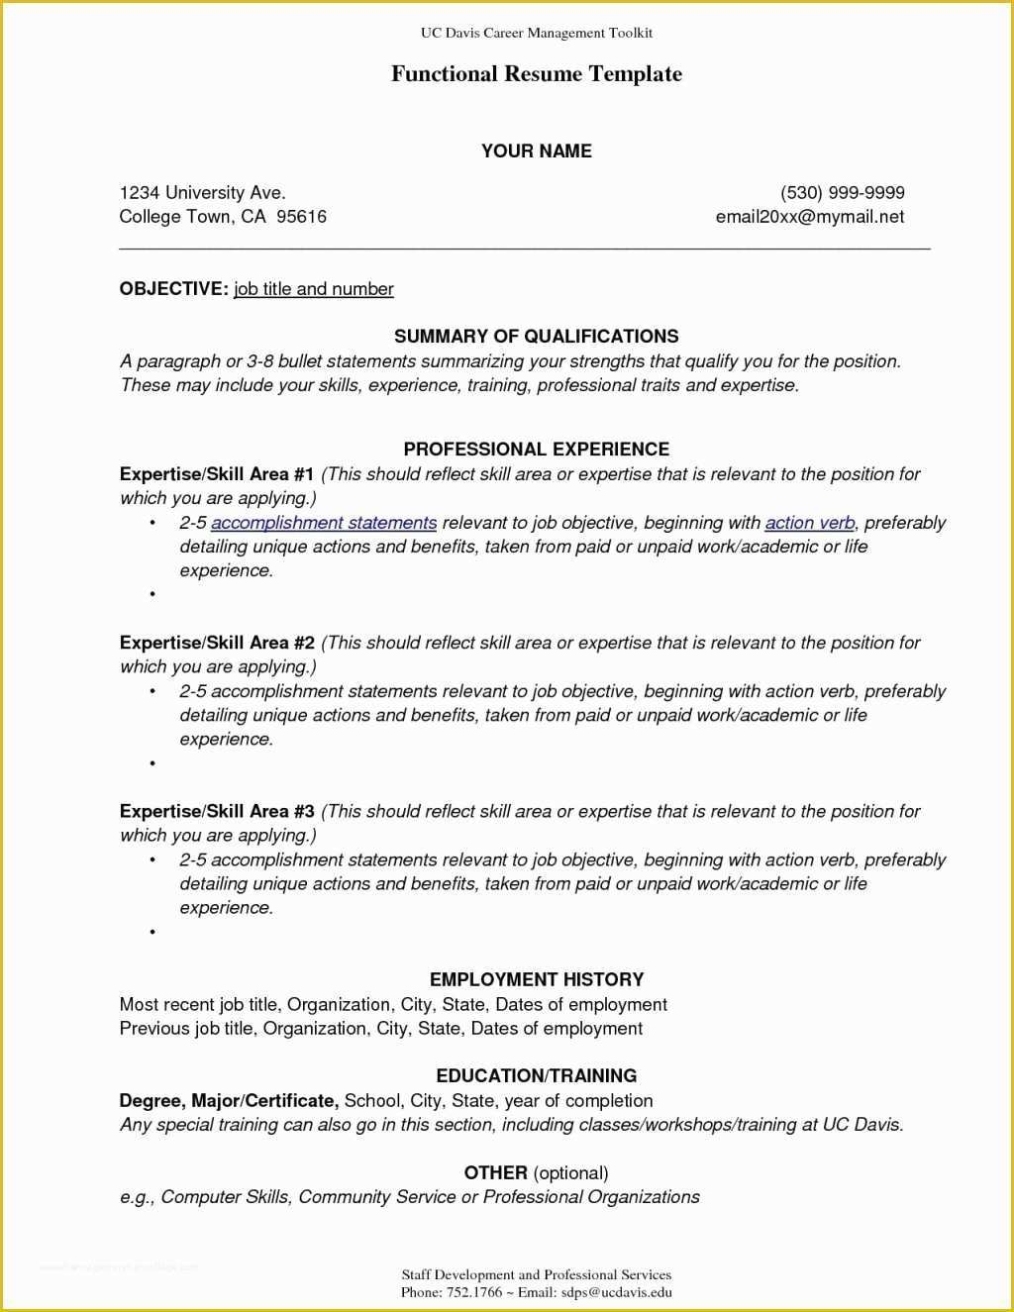 Free Combination Resume Template Word Of Microsoft Word Resume Templates 2017 Free New Resume Inside Combination Resume Template Word